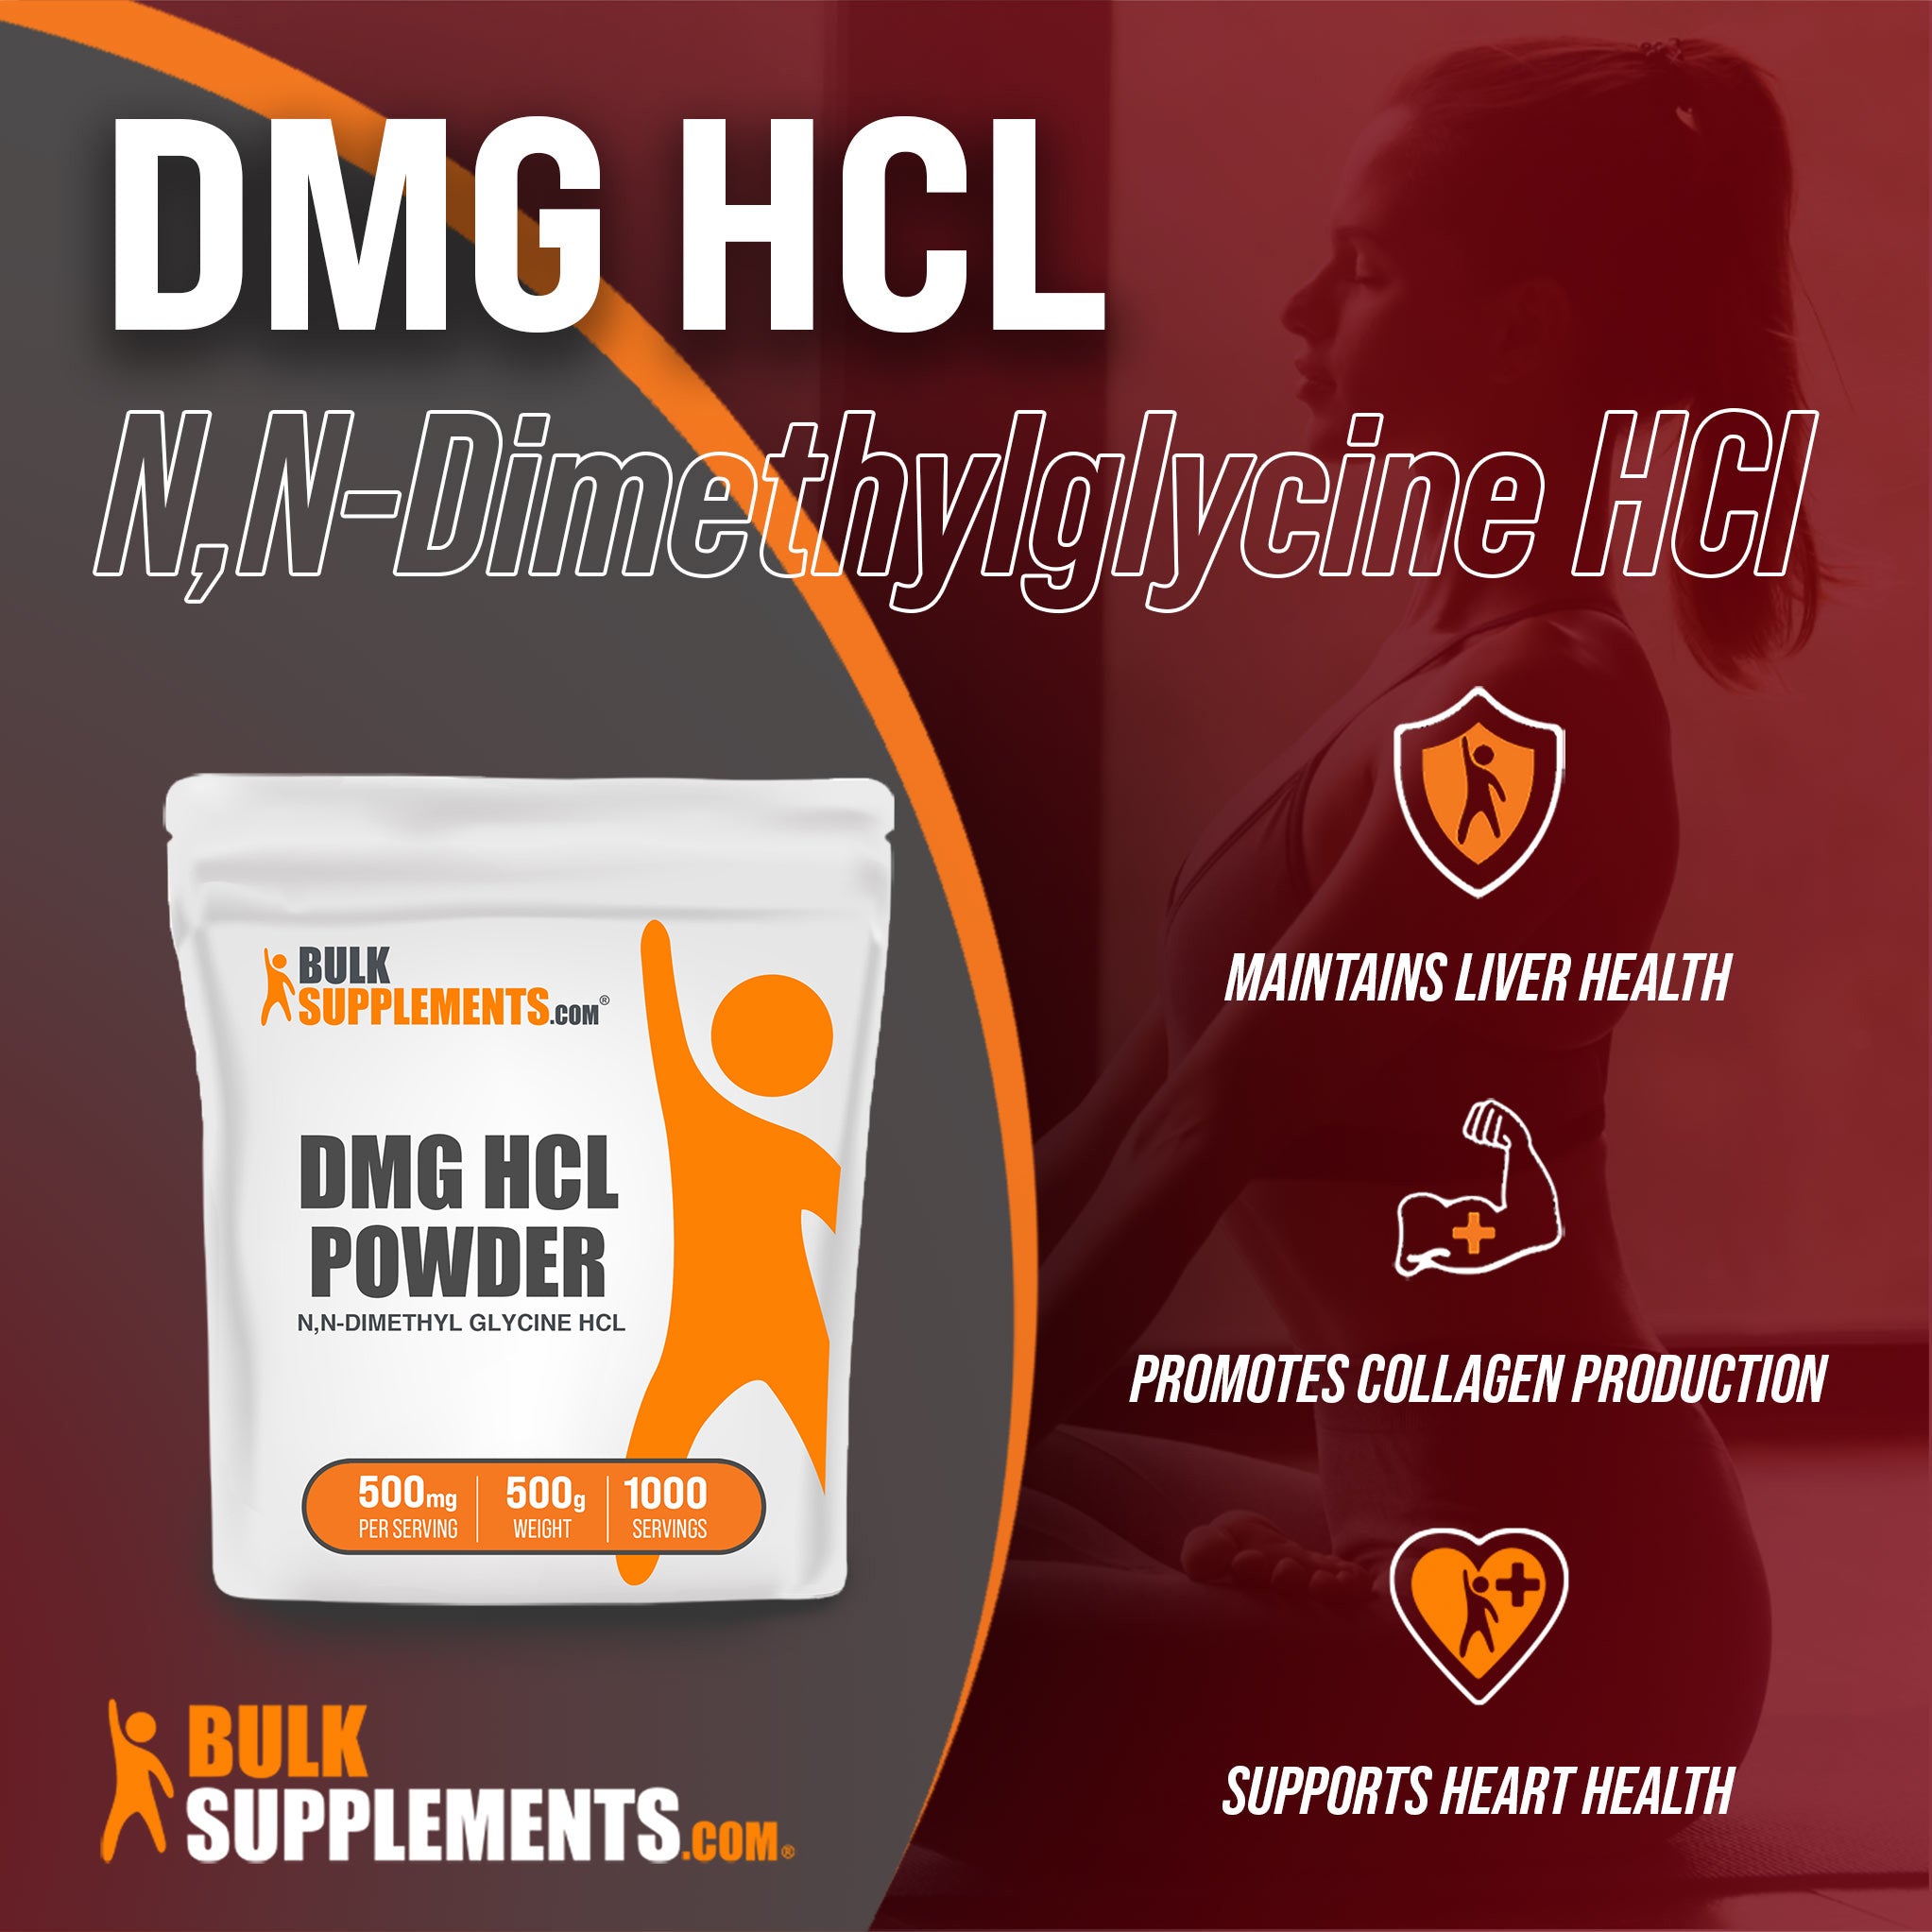 Benefits of DMG HCl: maintains liver health, promotes collagen production, supports heart health